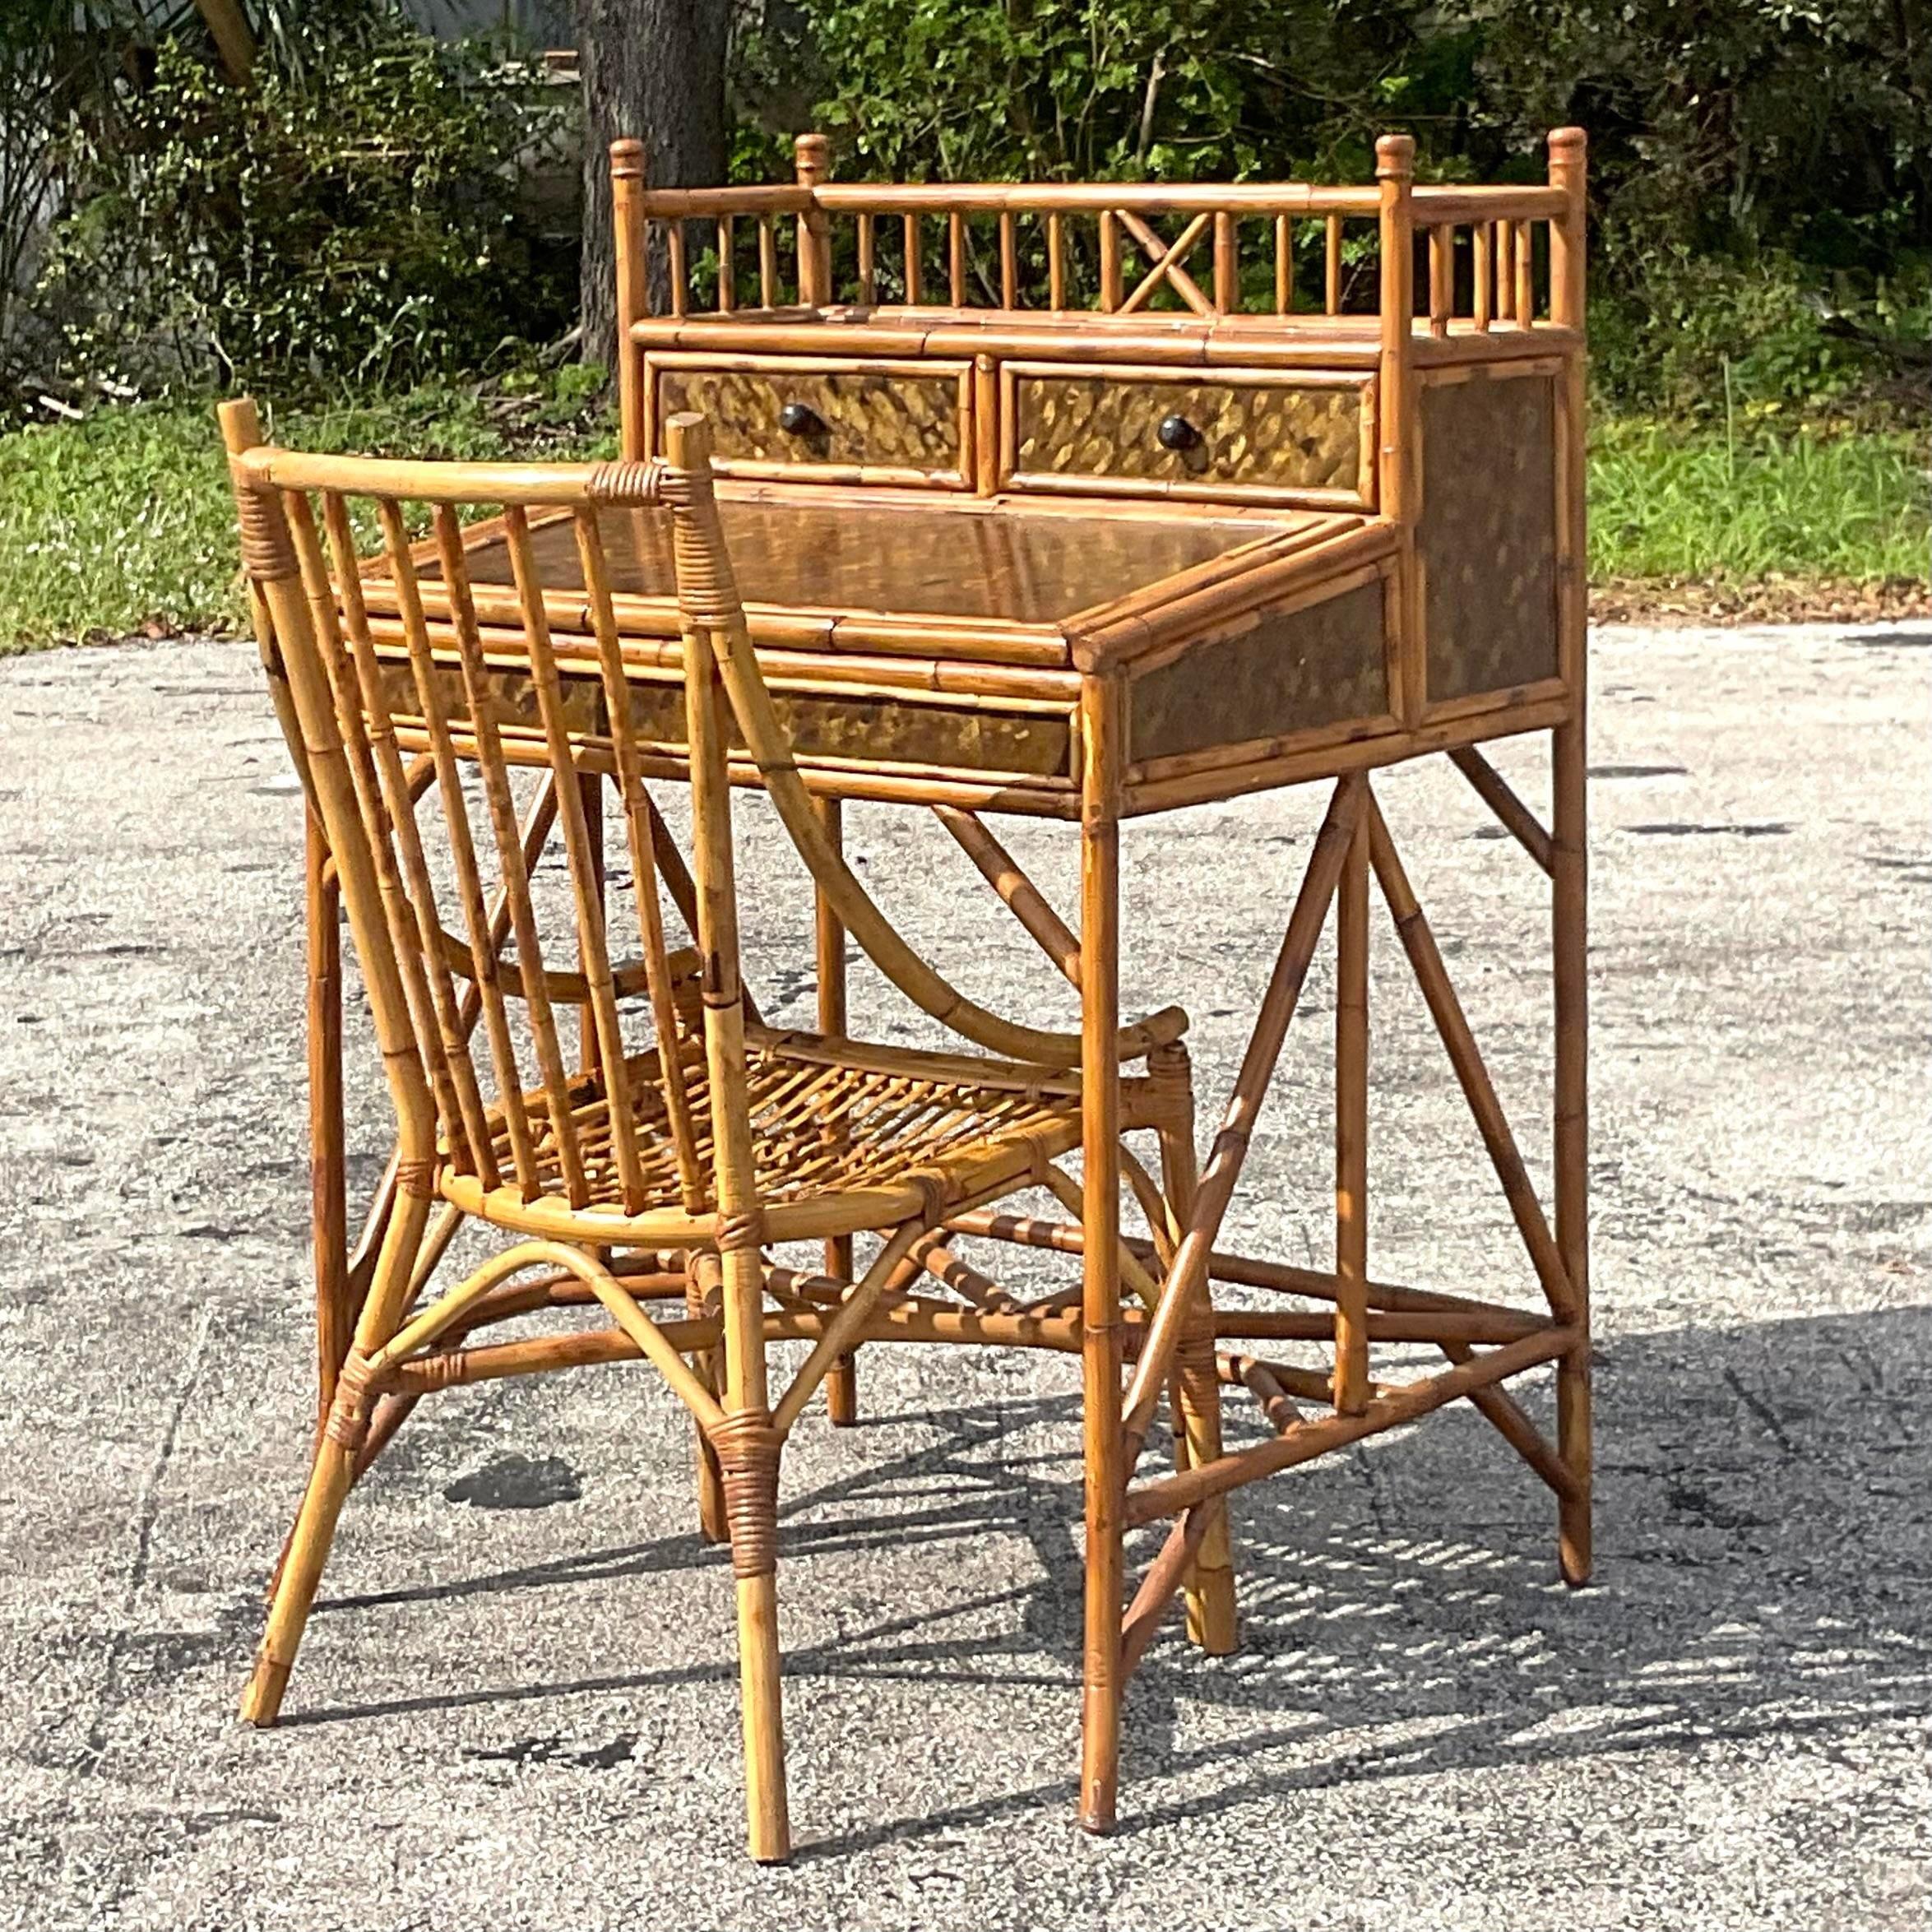 A fantastic vintage Boho writing desk. A chic burnt bamboo beams with gorgeous gold detailing along the panels. The desk is a sloped writing surface with storage below for your supplies and paper. Coordinating bent rattan chair included. Acquired